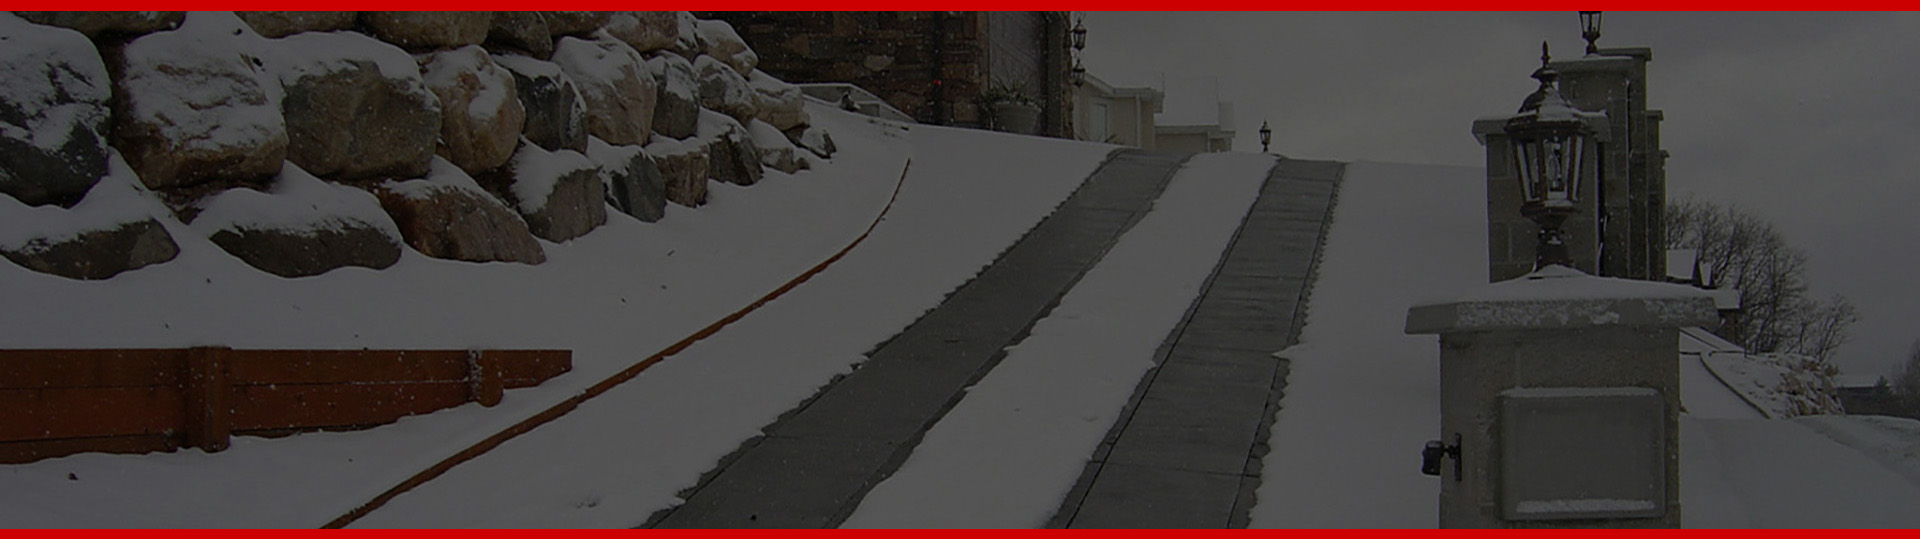 Frequently asked questions about heated driveways and snow melting systems banner